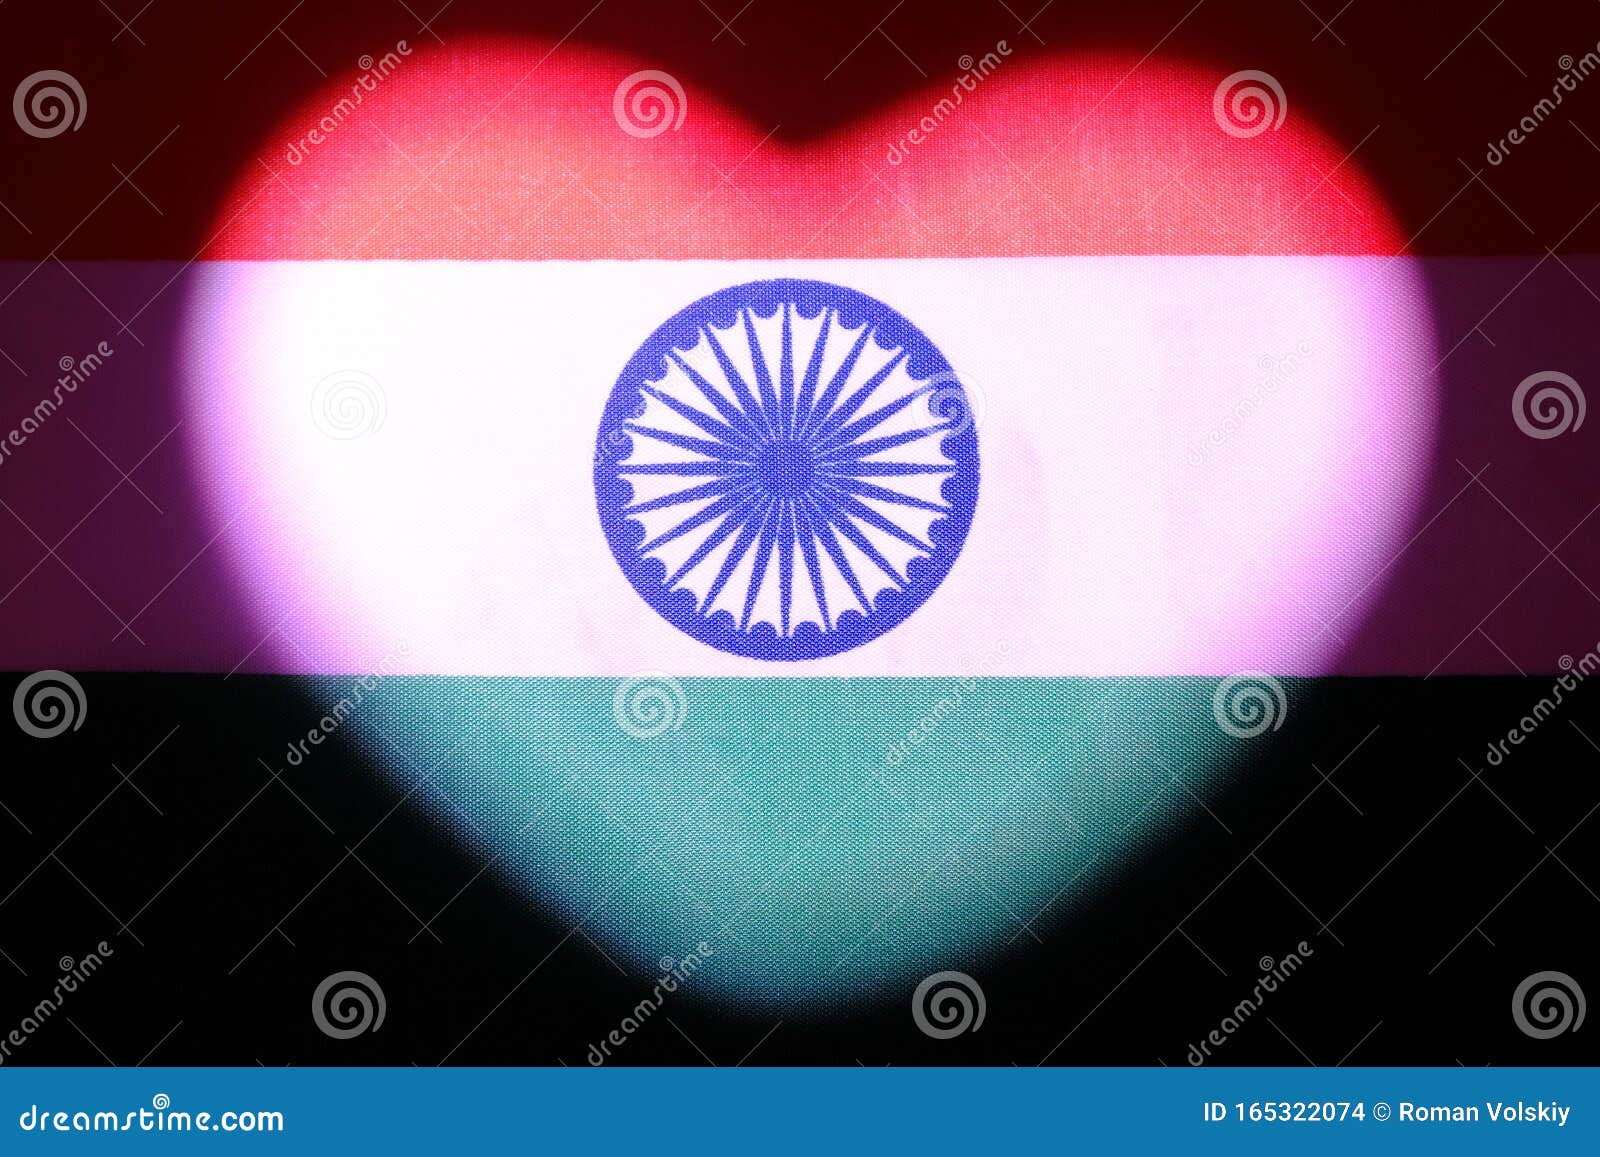 Heart Shaped India Flag. the Concept of Indian Love, Patriotism and  Independence. Country Symbol for Design and Illustration of Stock Photo -  Image of natural, international: 165322074